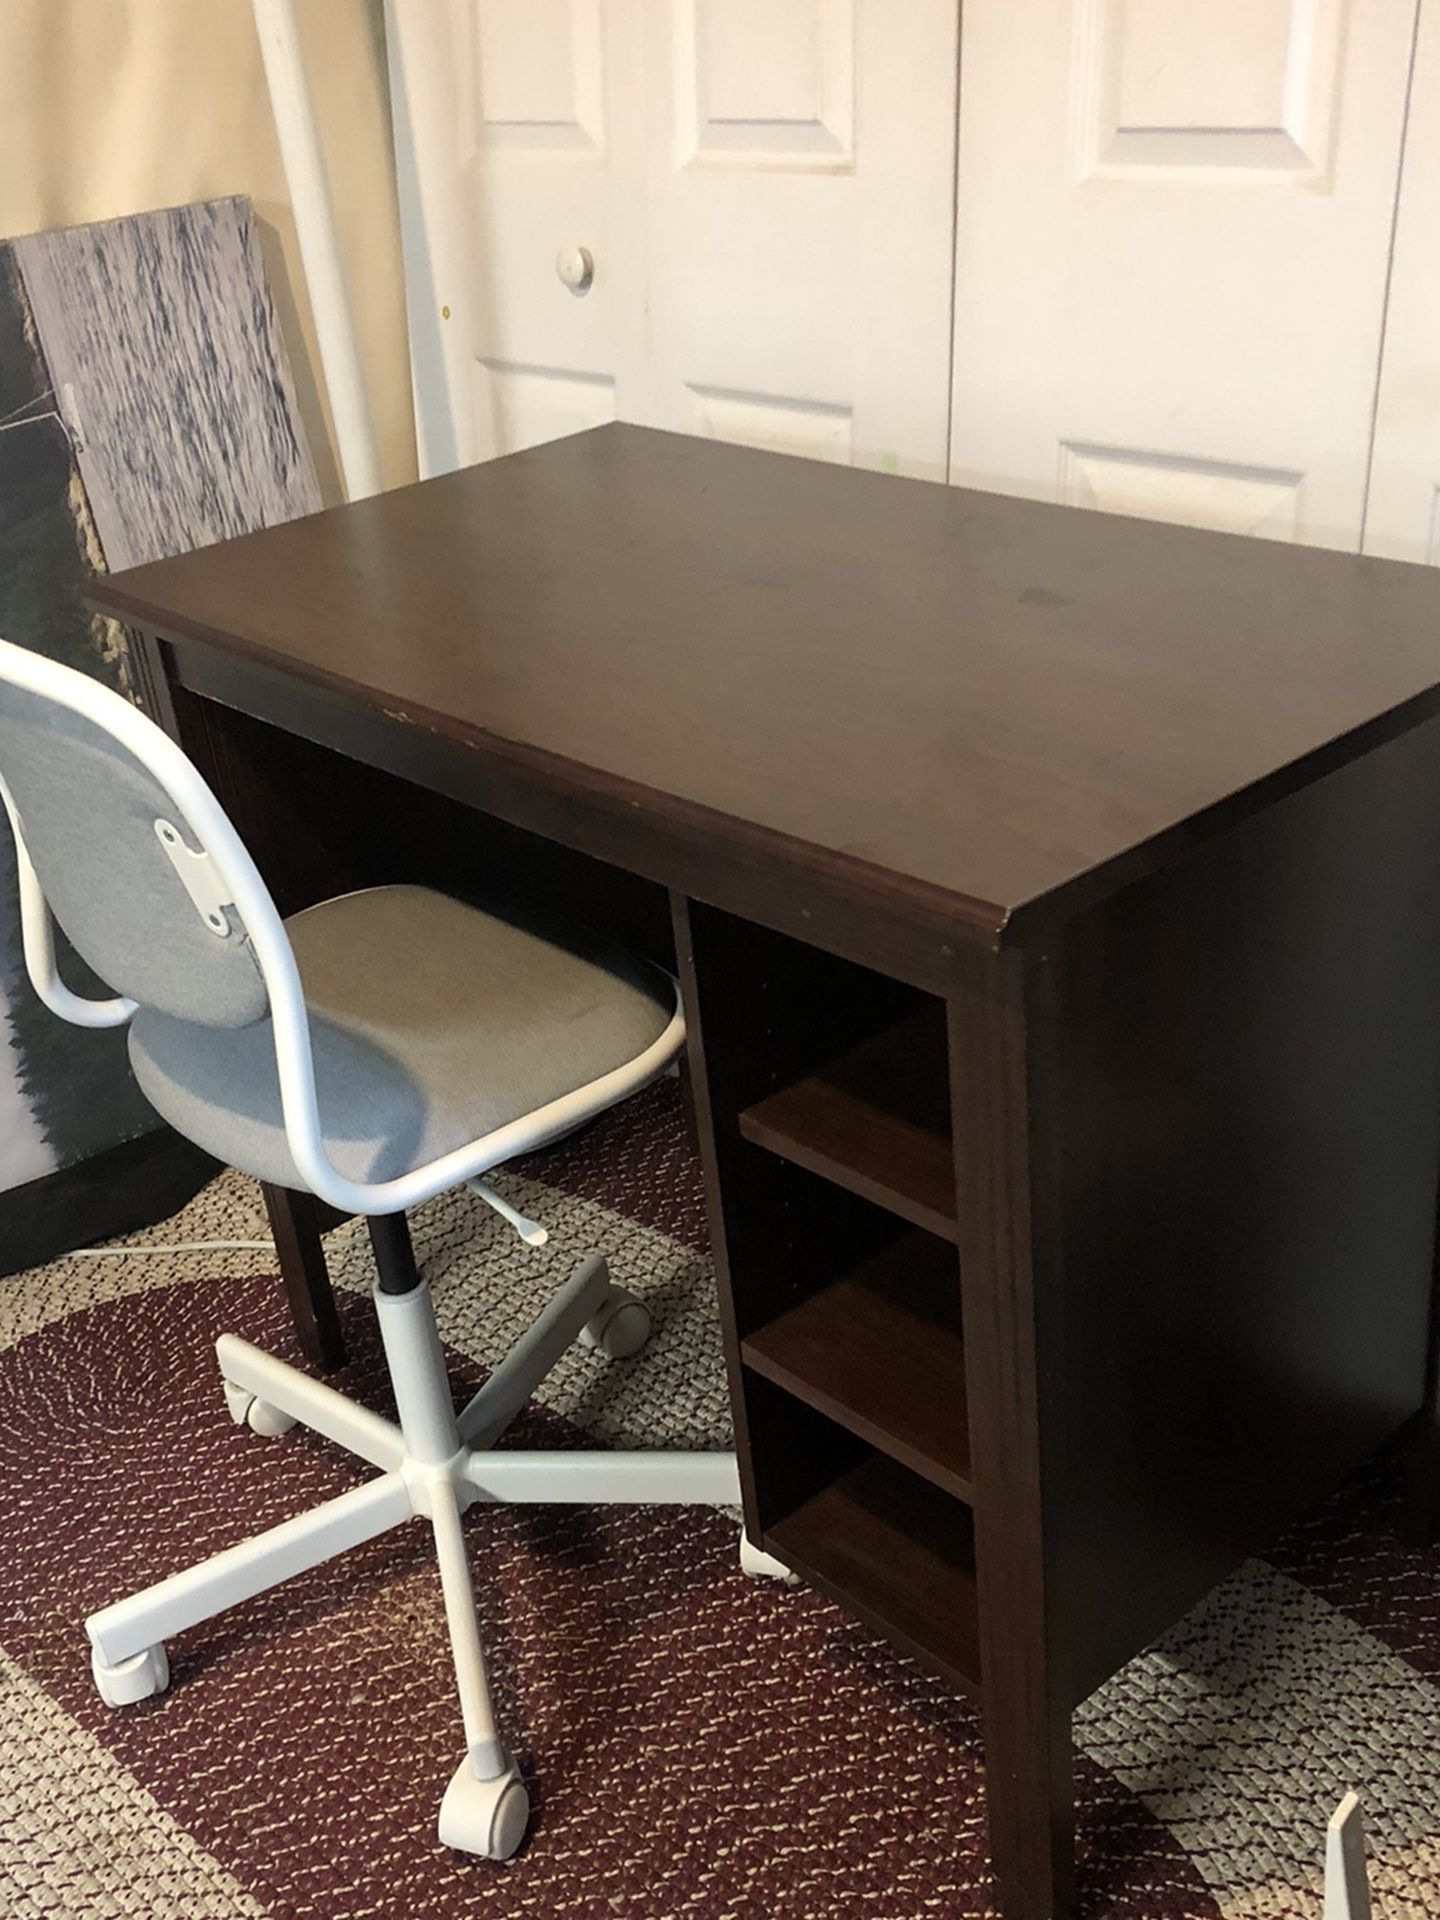 Kids desk and chair good condition￼